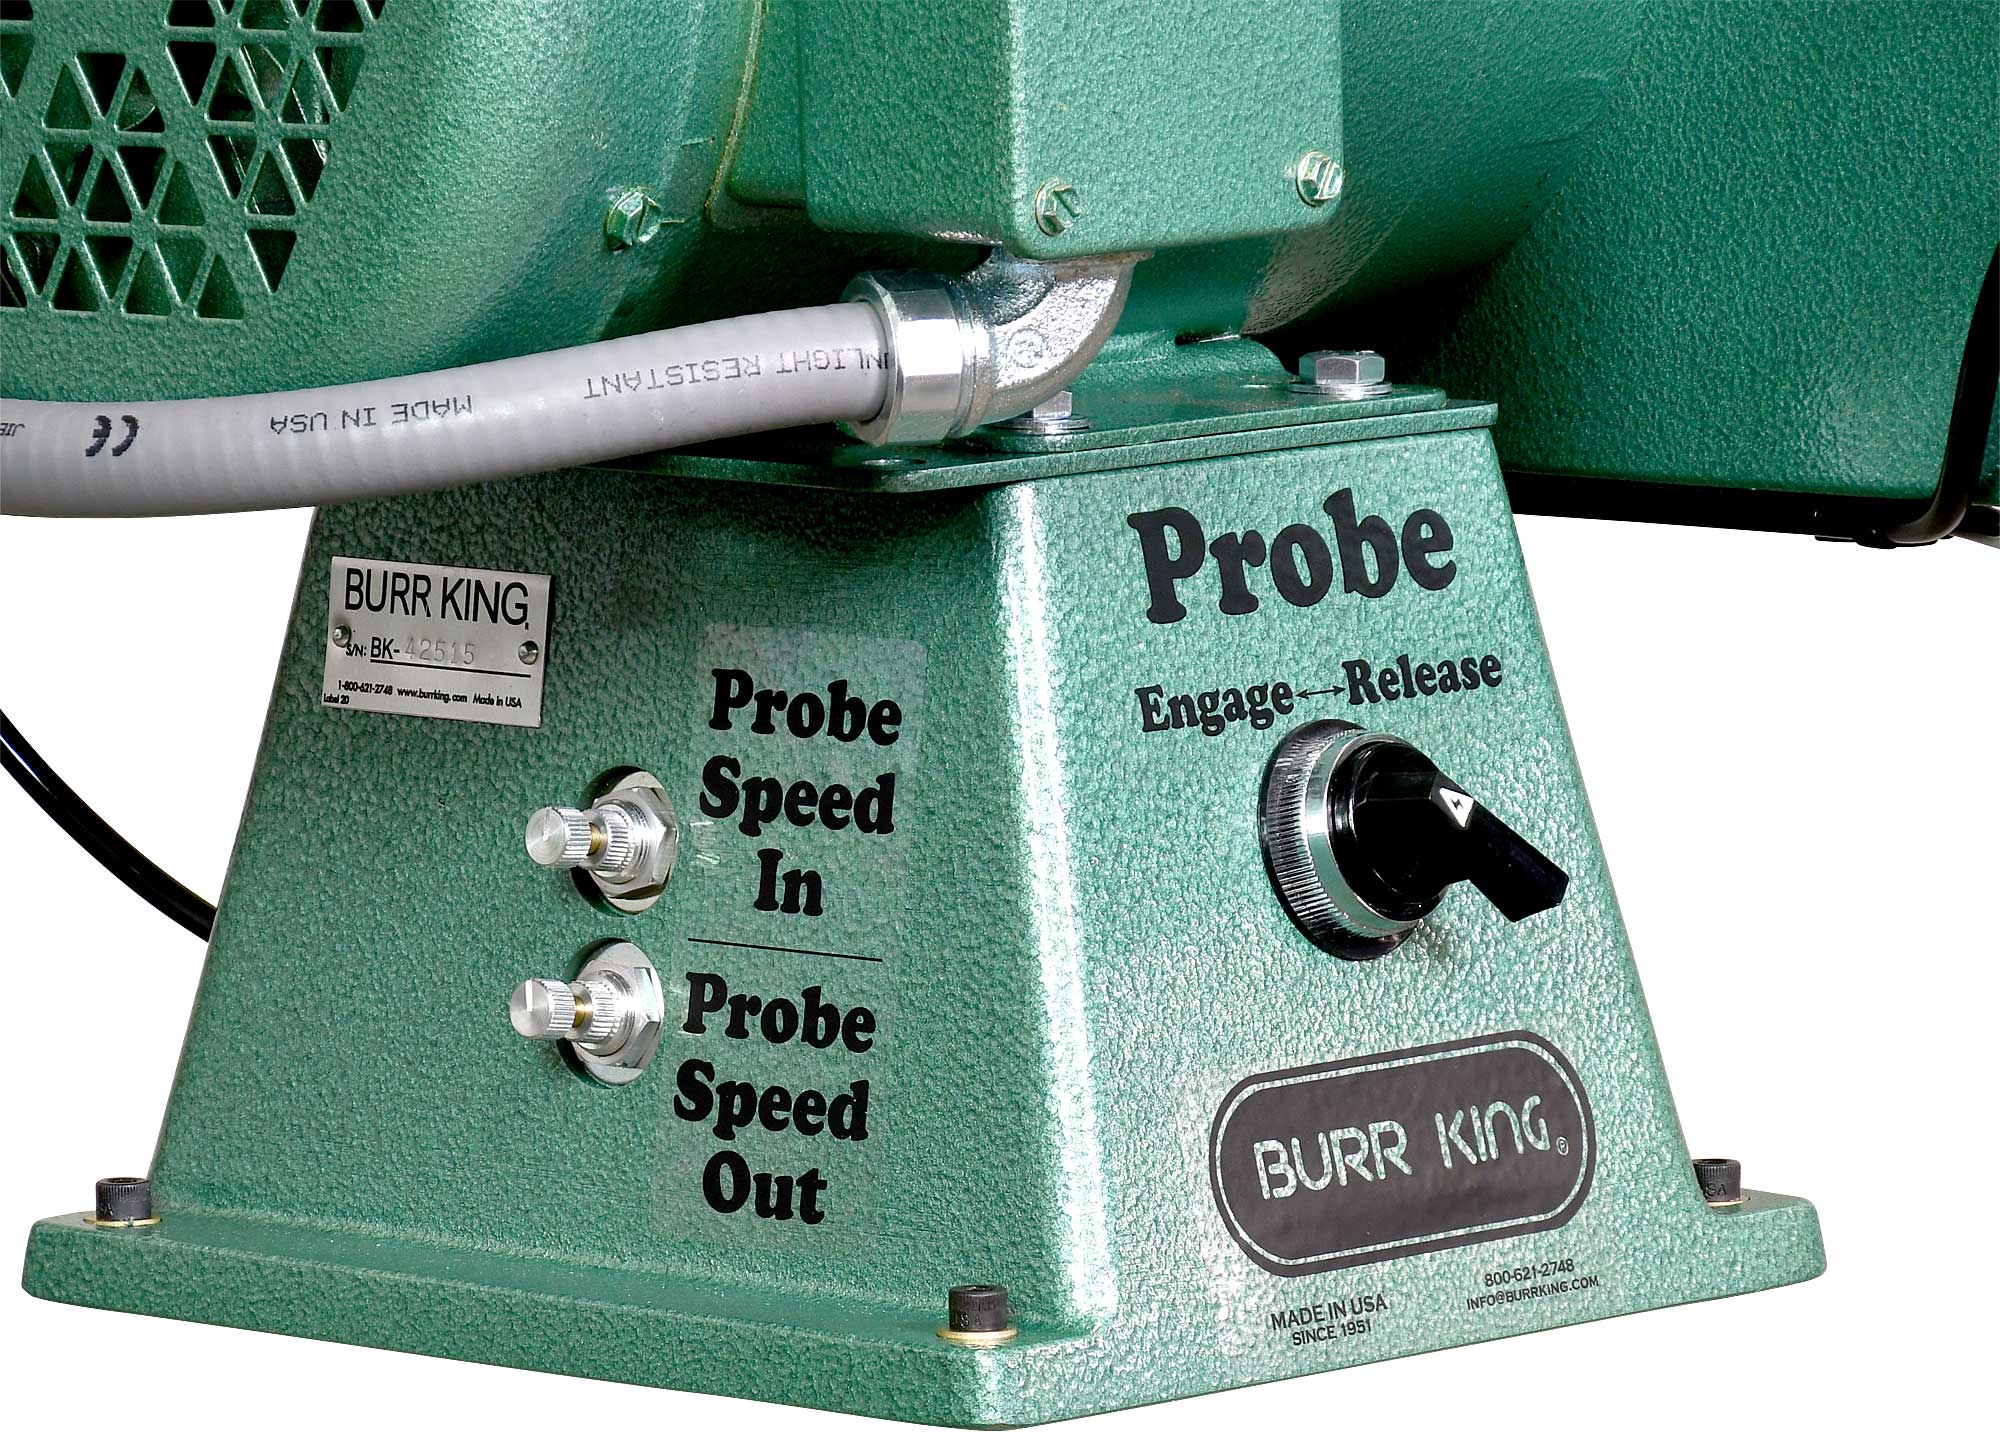 No more guessing with the 720 probe grinder with air tension system.  